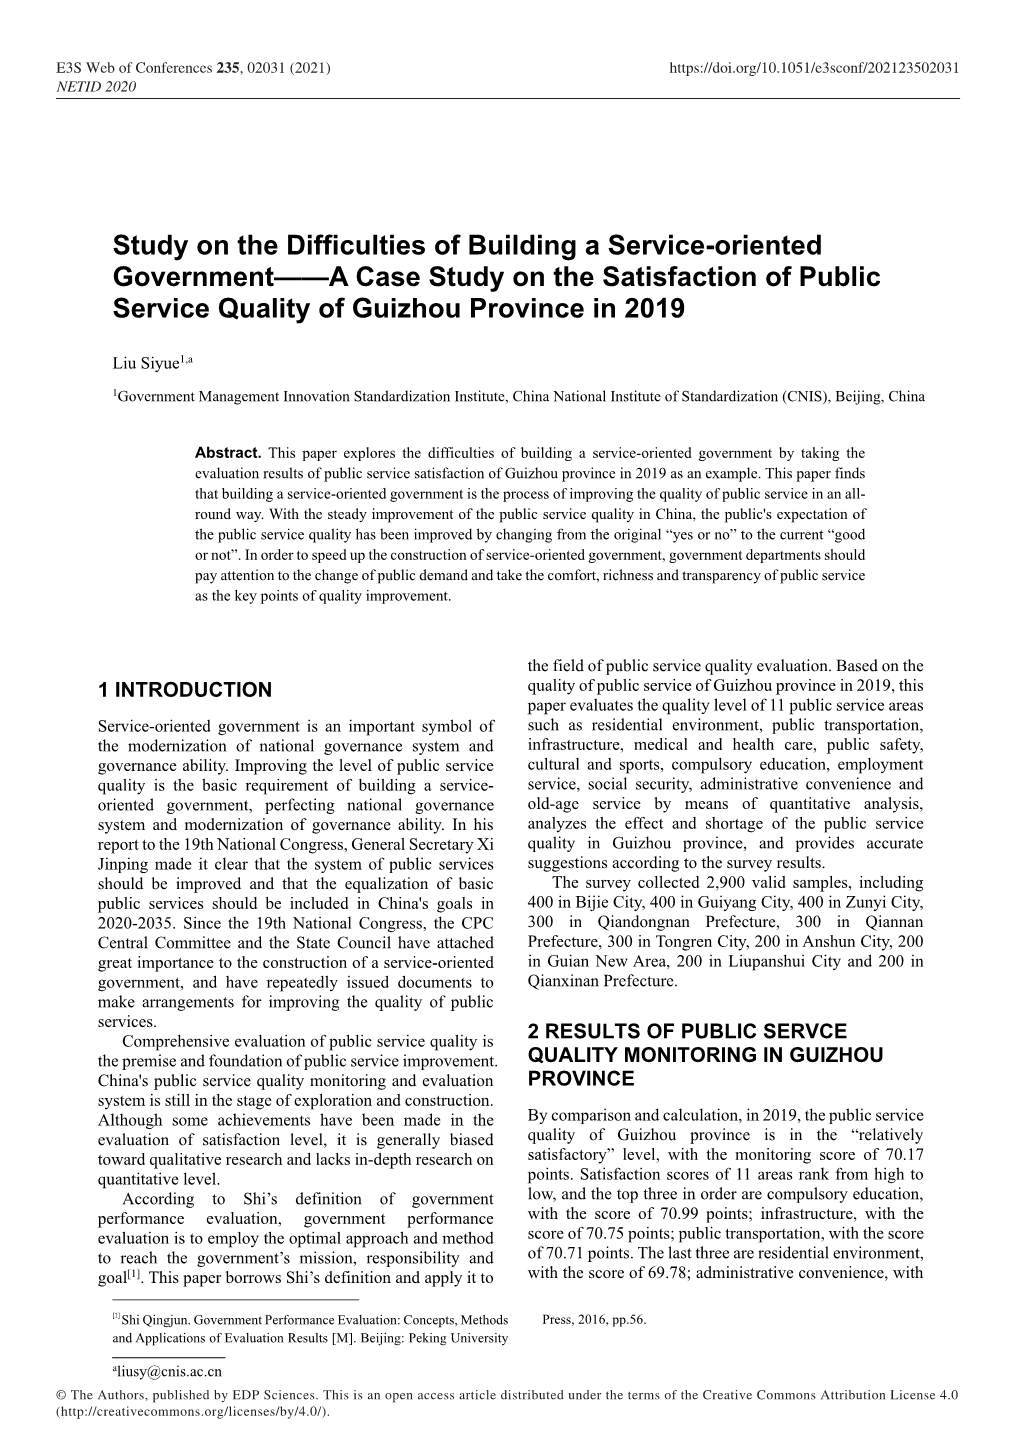 Study on the Difficulties of Building a Service-Oriented Government——A Case Study on the Satisfaction of Public Service Quality of Guizhou Province in 2019